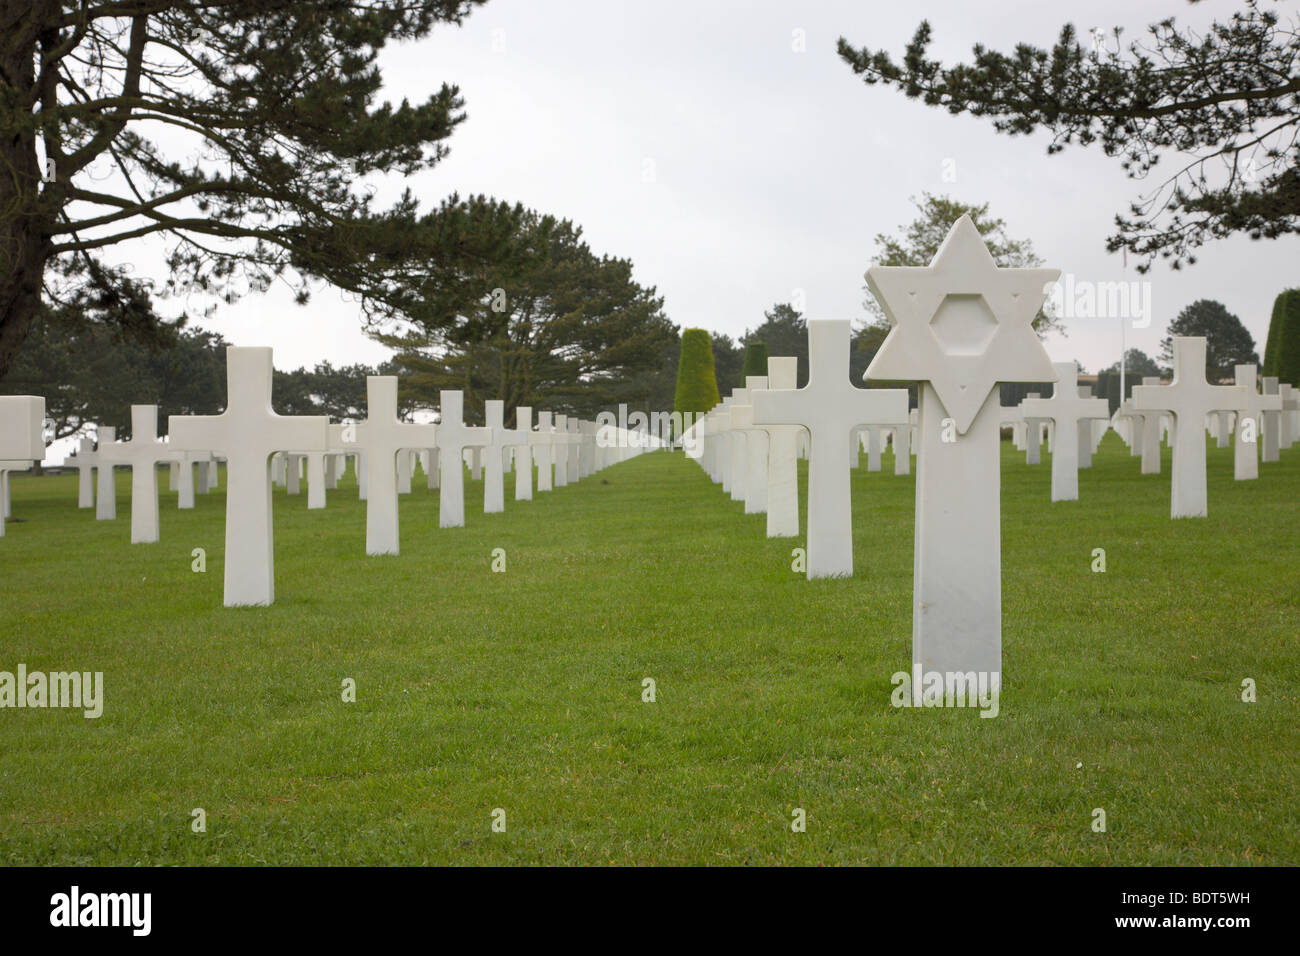 White crosses, David stars and graves at The Normandy American Cemetery and Memorial at Omaha Beach, Normandy, France, near Bayeux. Stock Photo